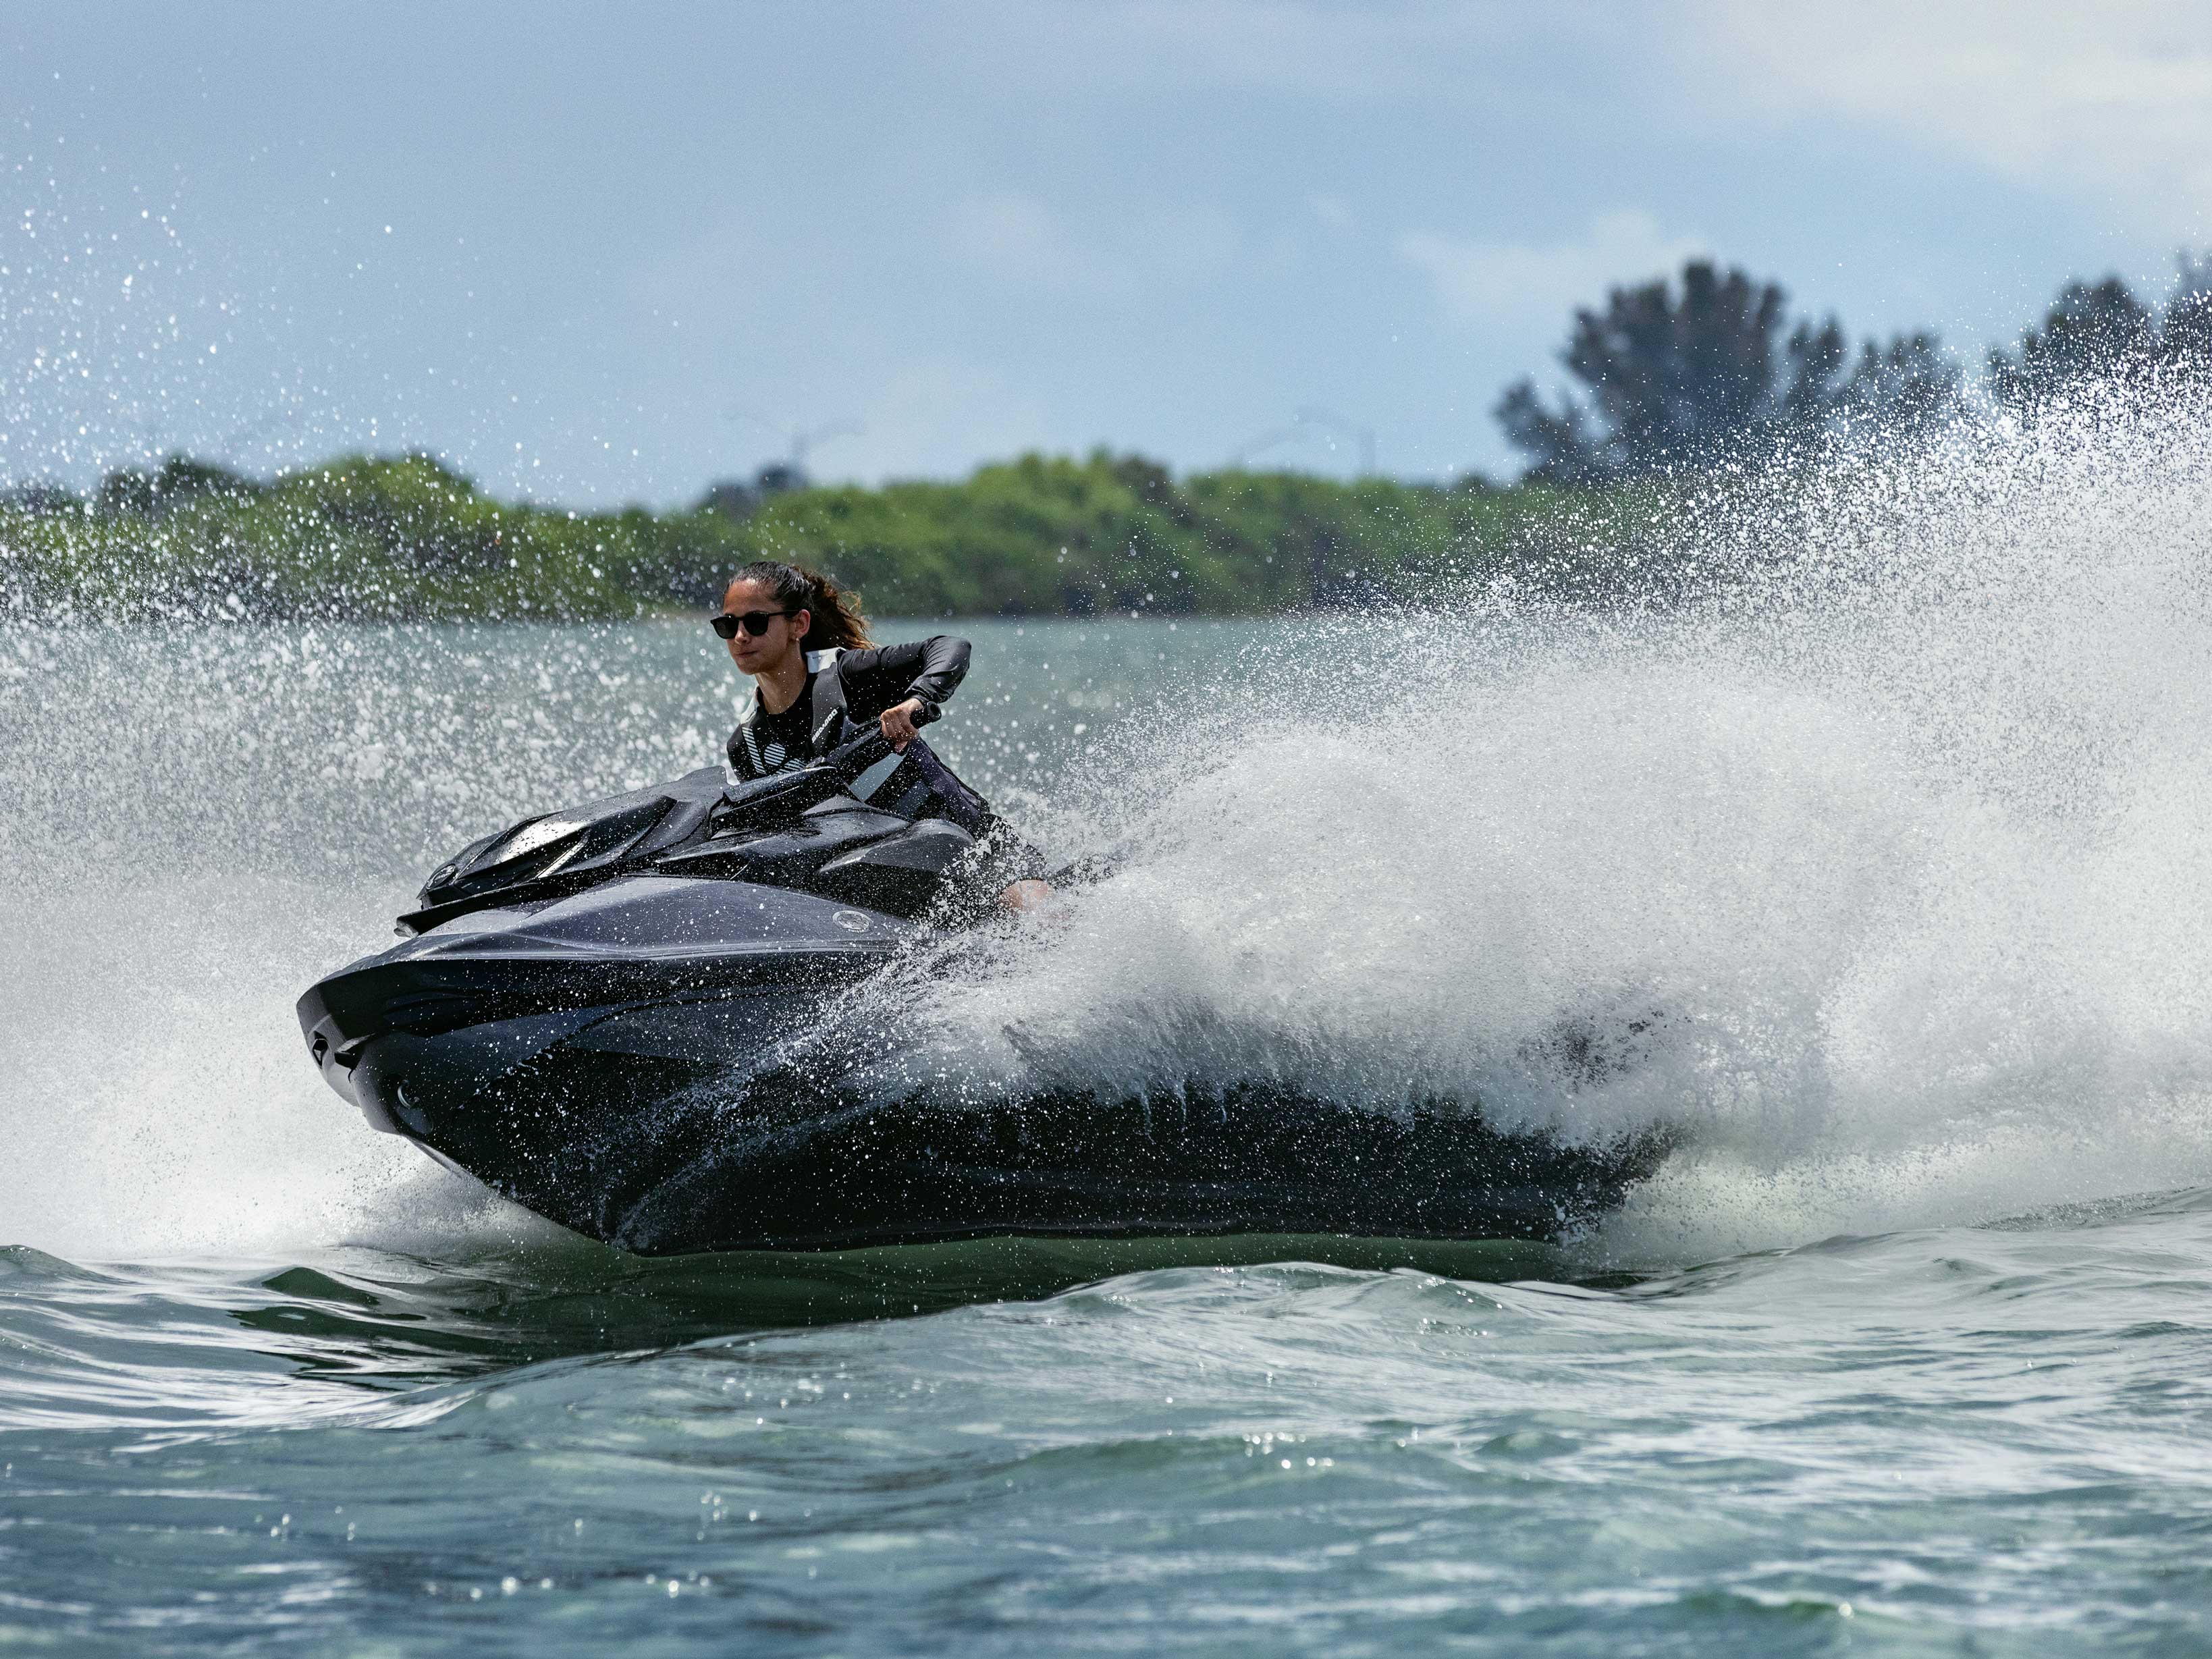 Woman carving water with the 2022 Sea-Doo RXP-X